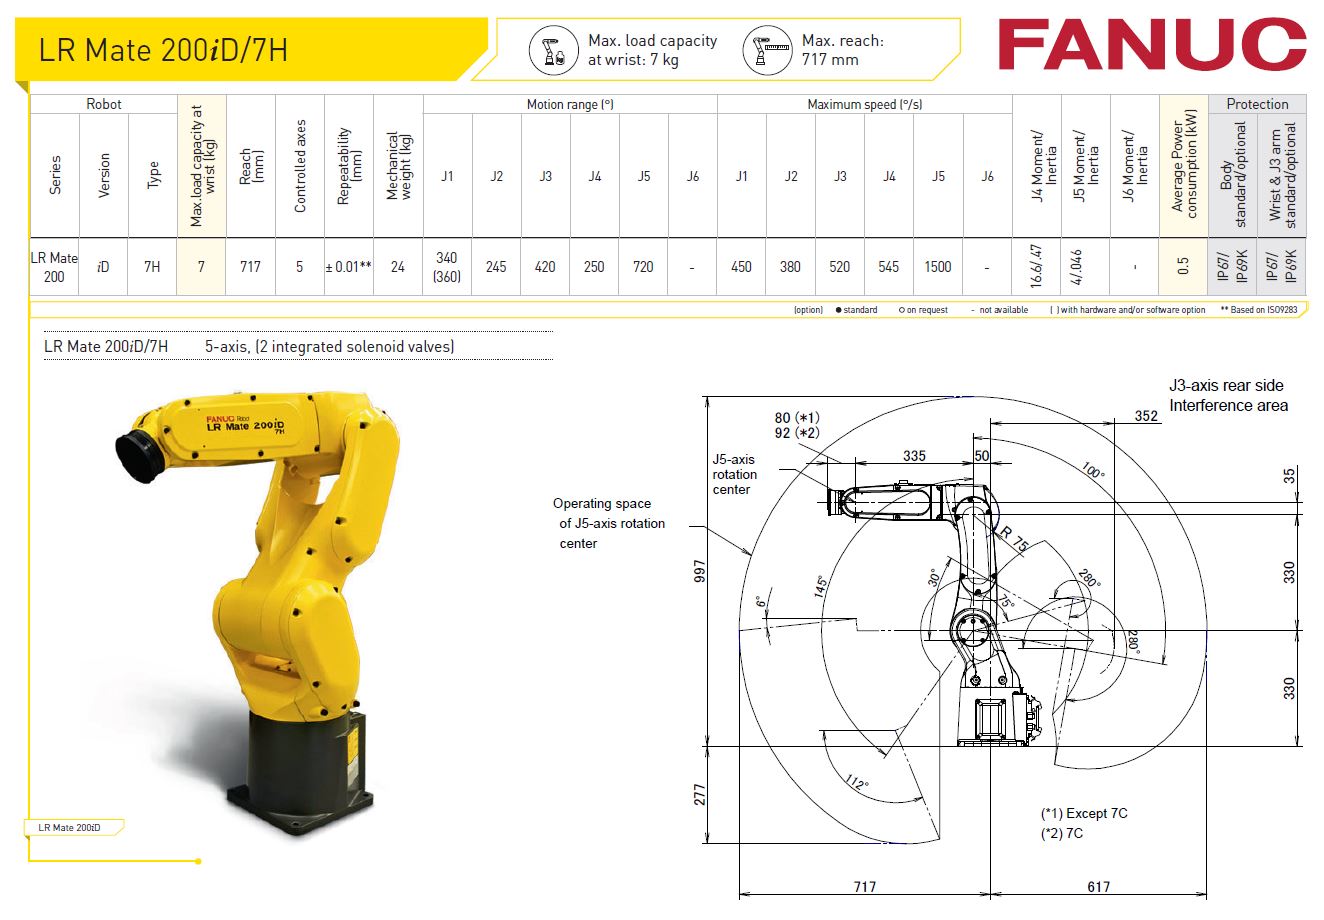 LR Mate 200iD-7H Fanuc Robot Specification from Robot World Automation